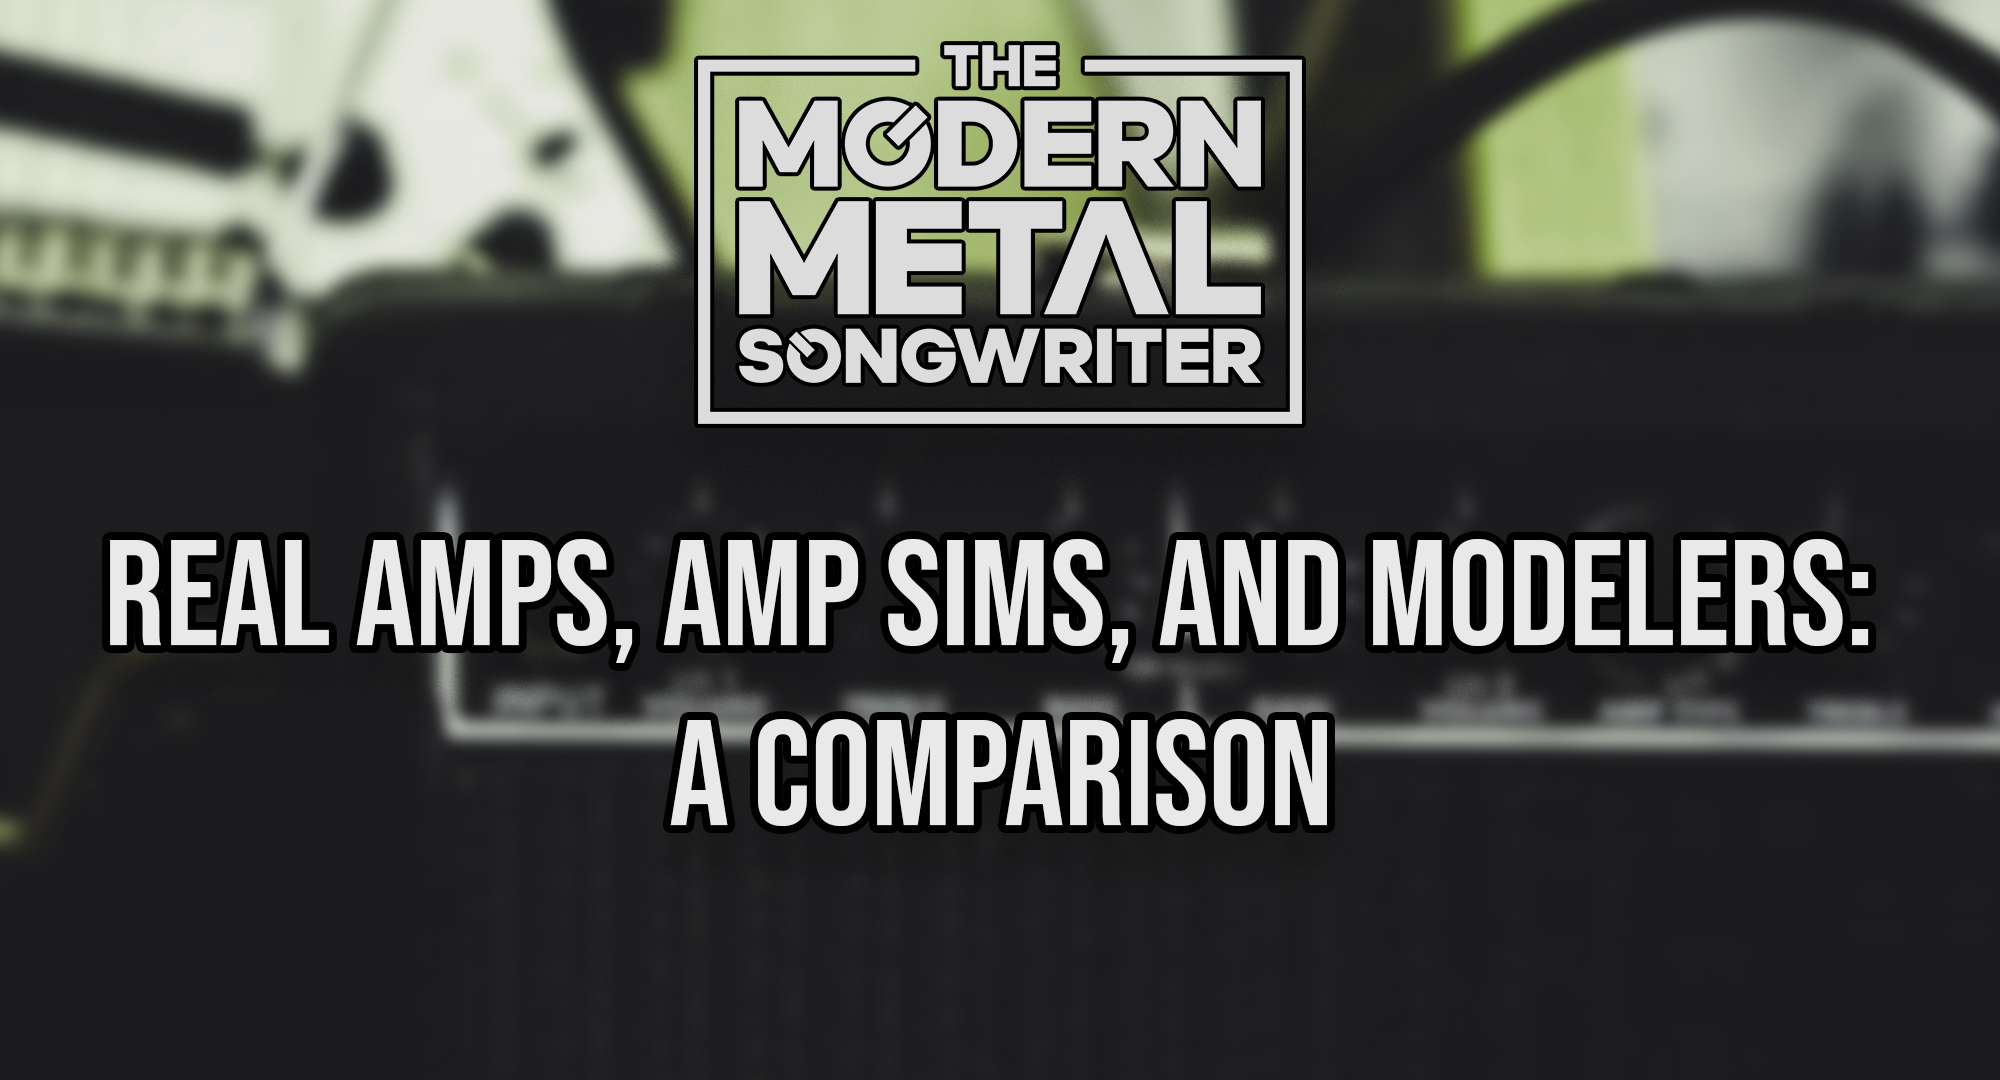 Real-Amps-Amp-Sims-and-Modelers-A-Comparison ModernMetalSongwriter graphic